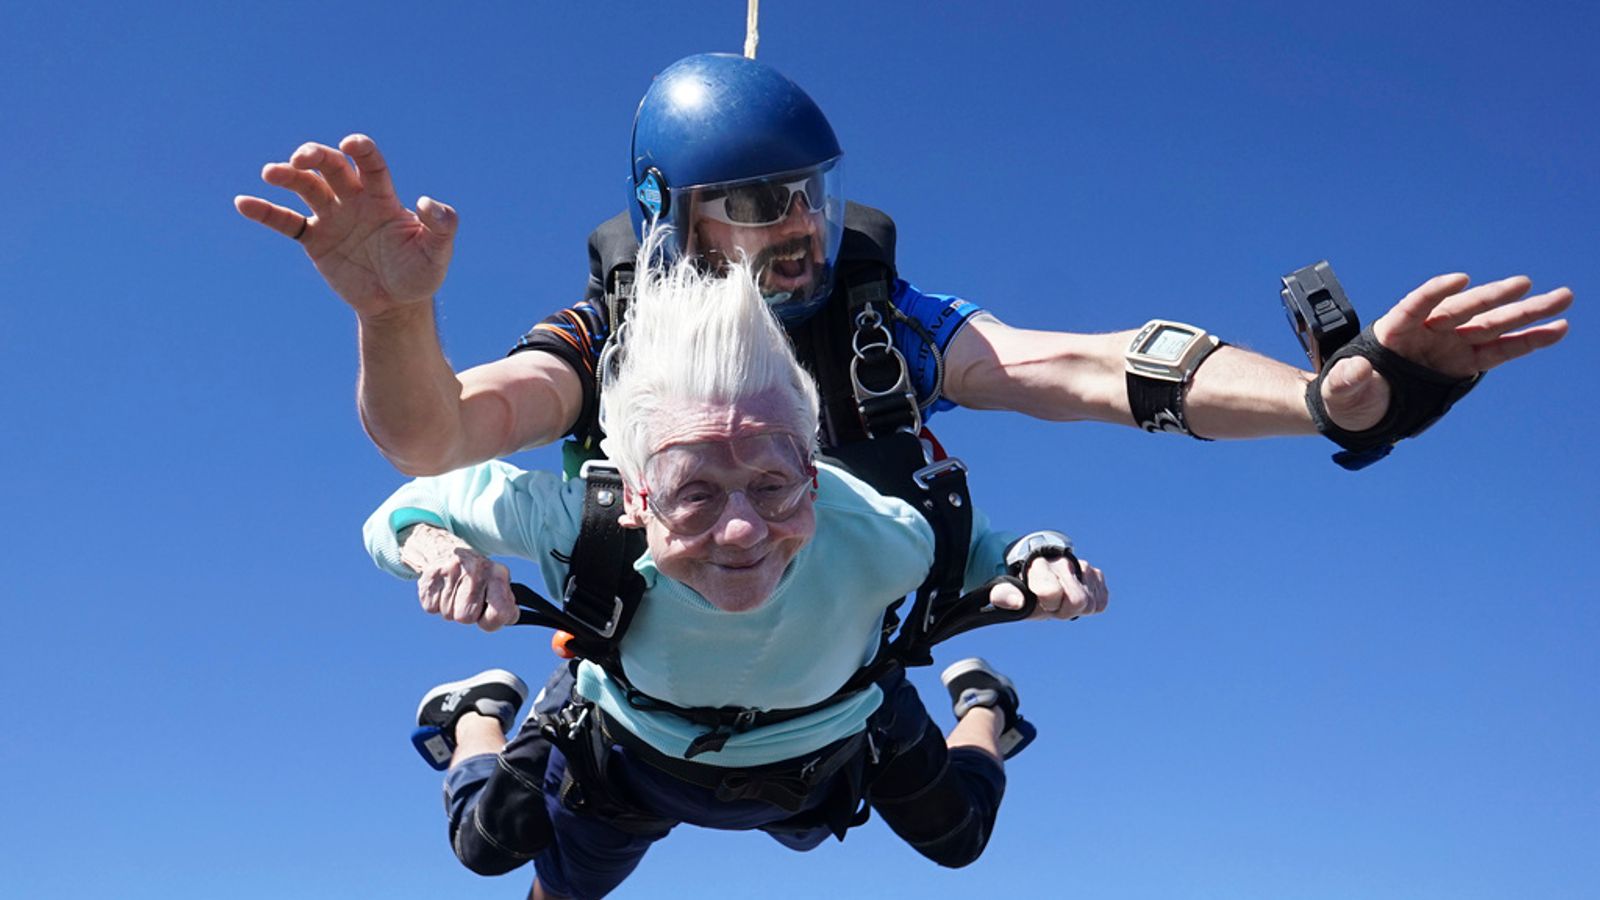 Chicago woman attempts to break record as world’s oldest skydiver at 104 | US News